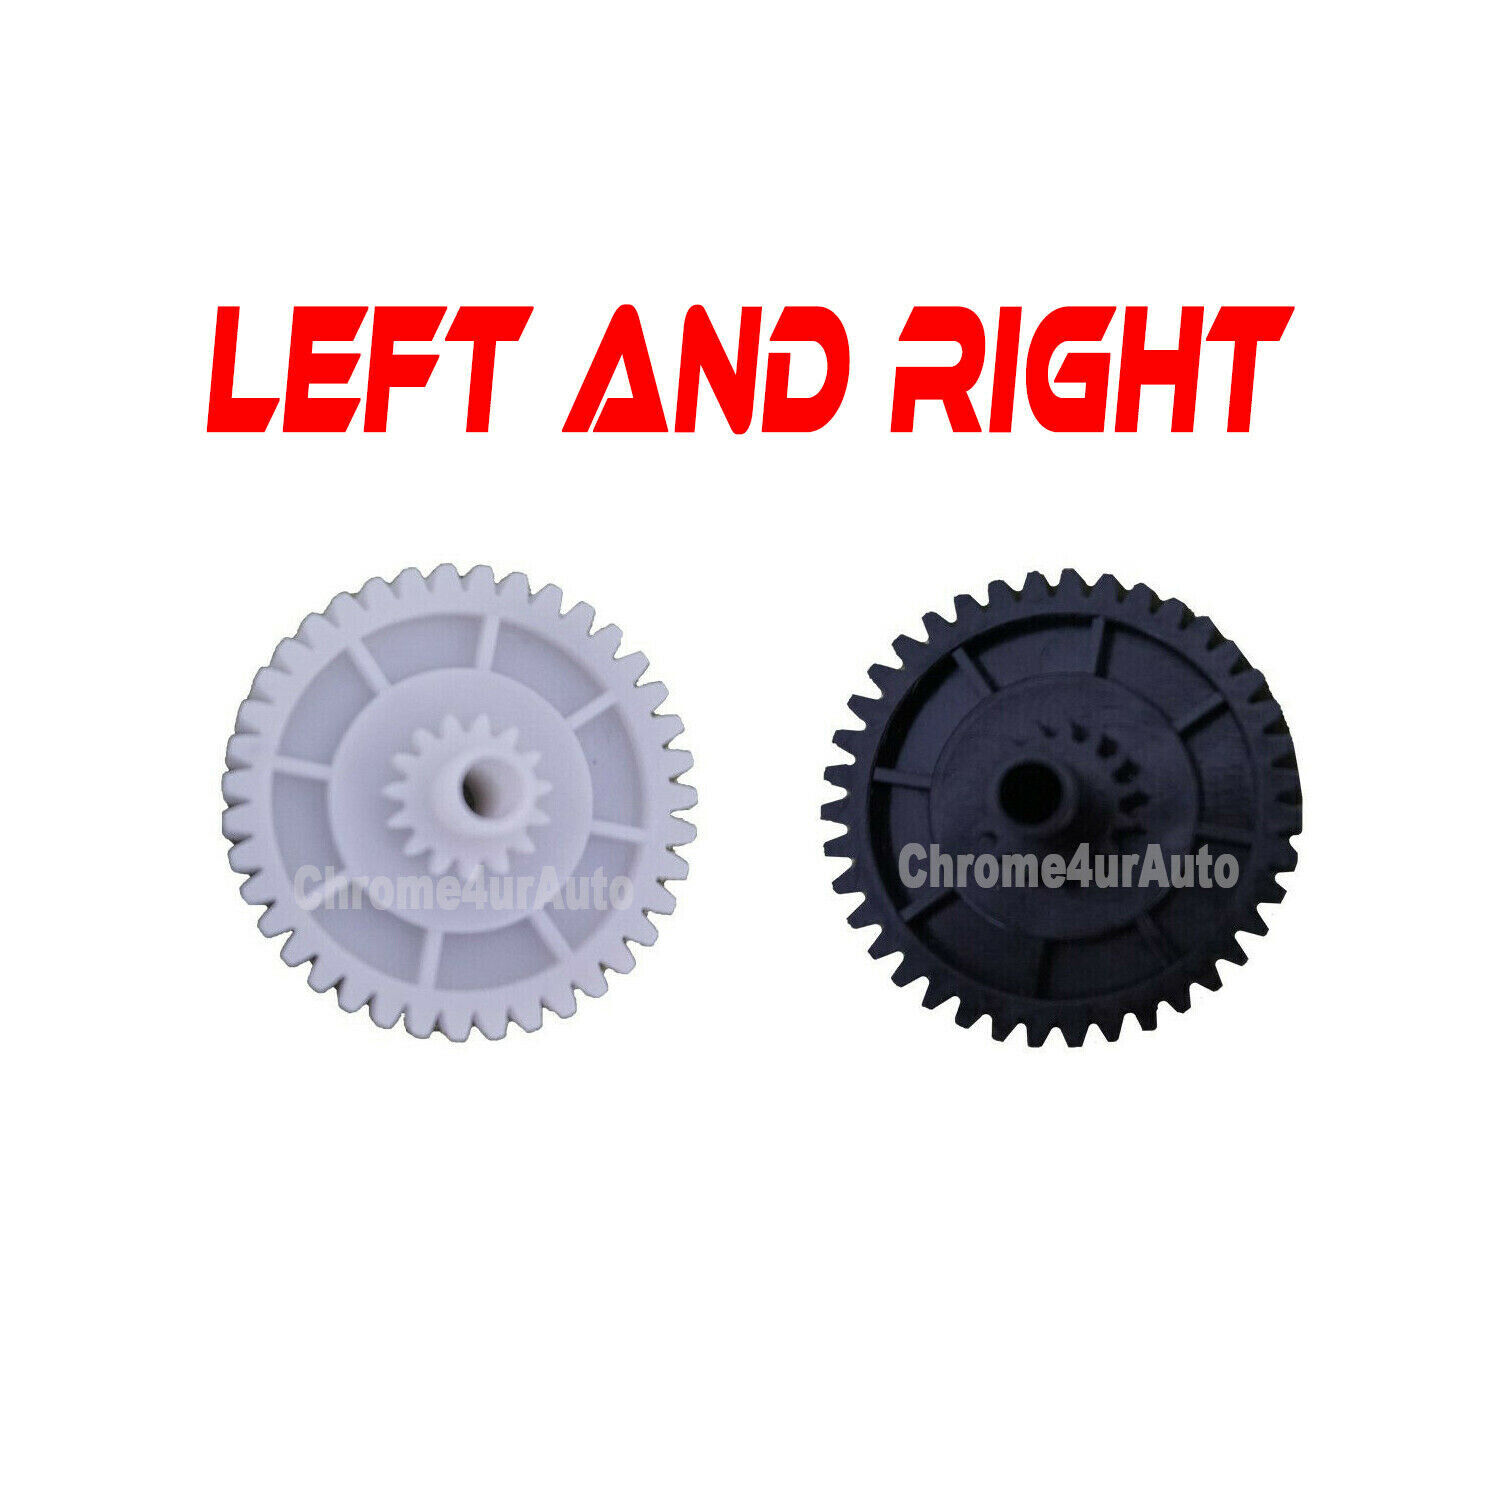 Porsche Boxster convertible top transmission Gears Left Right Side Gears 97-2012